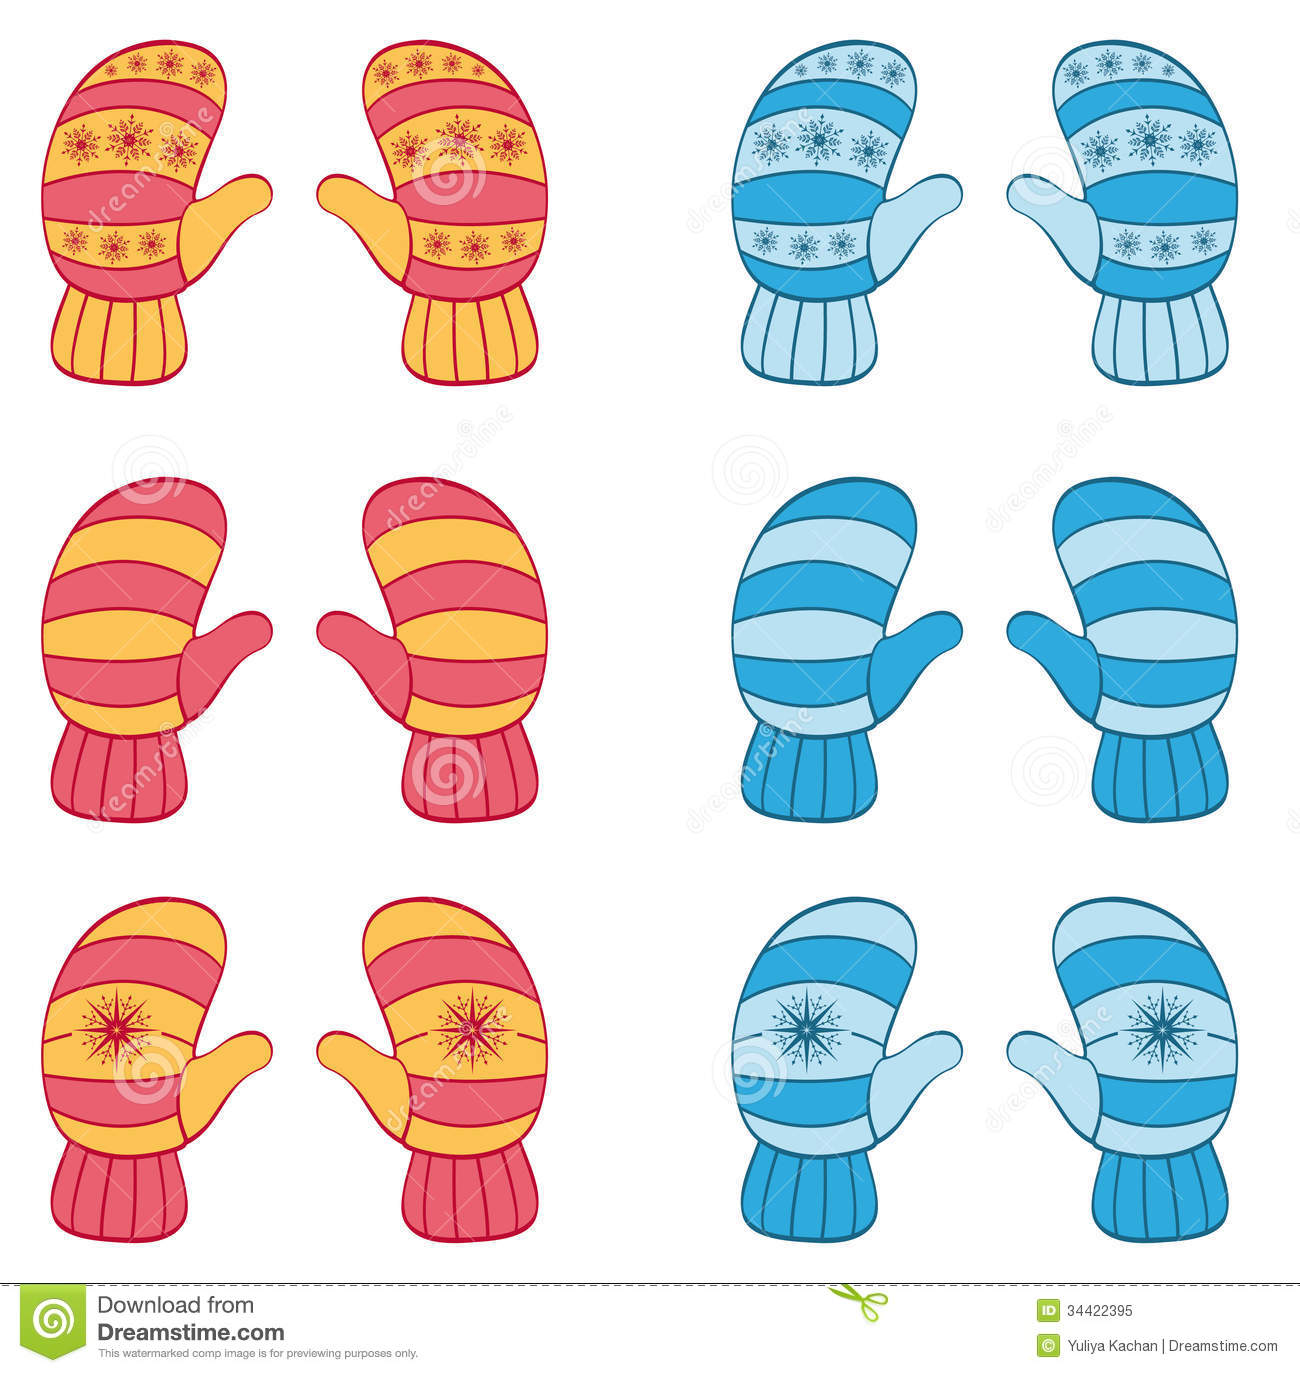 clipart of mittens and hat - photo #48